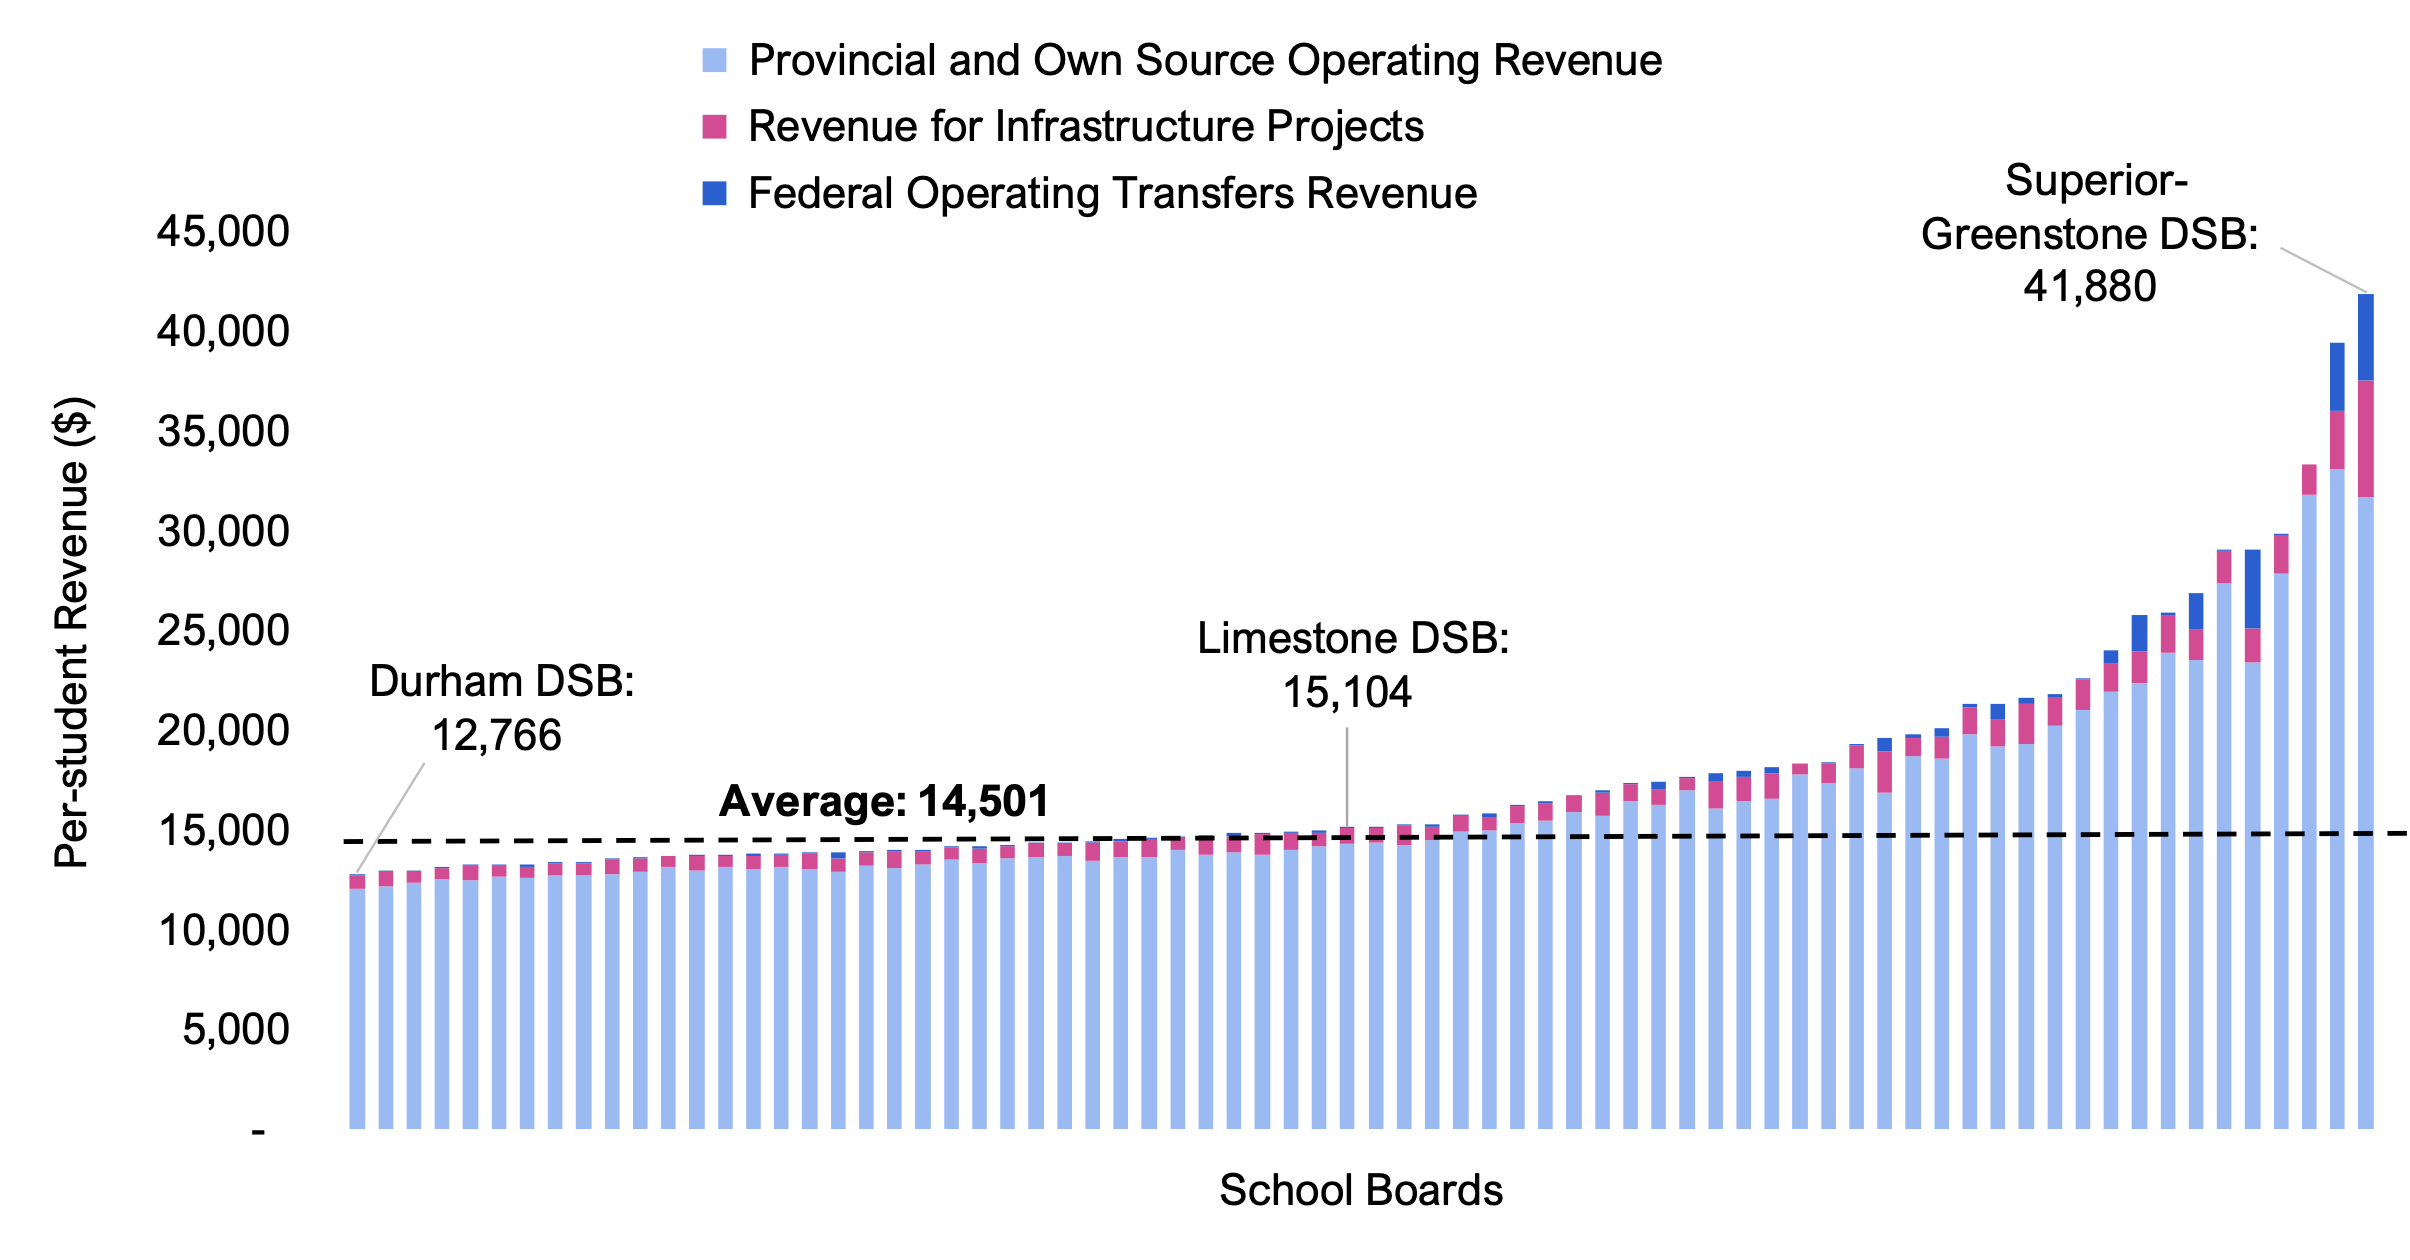 Figure 5.3 shows per-student revenue by school board and source (provincial and own source operating revenue, revenue for infrastructure projects and federal operating transfers revenue). The values range from a low of $12,766 for the Durham DSB to a high of $41,880 for the Superior-Greenstone DSB, with an overall average of $14,501.